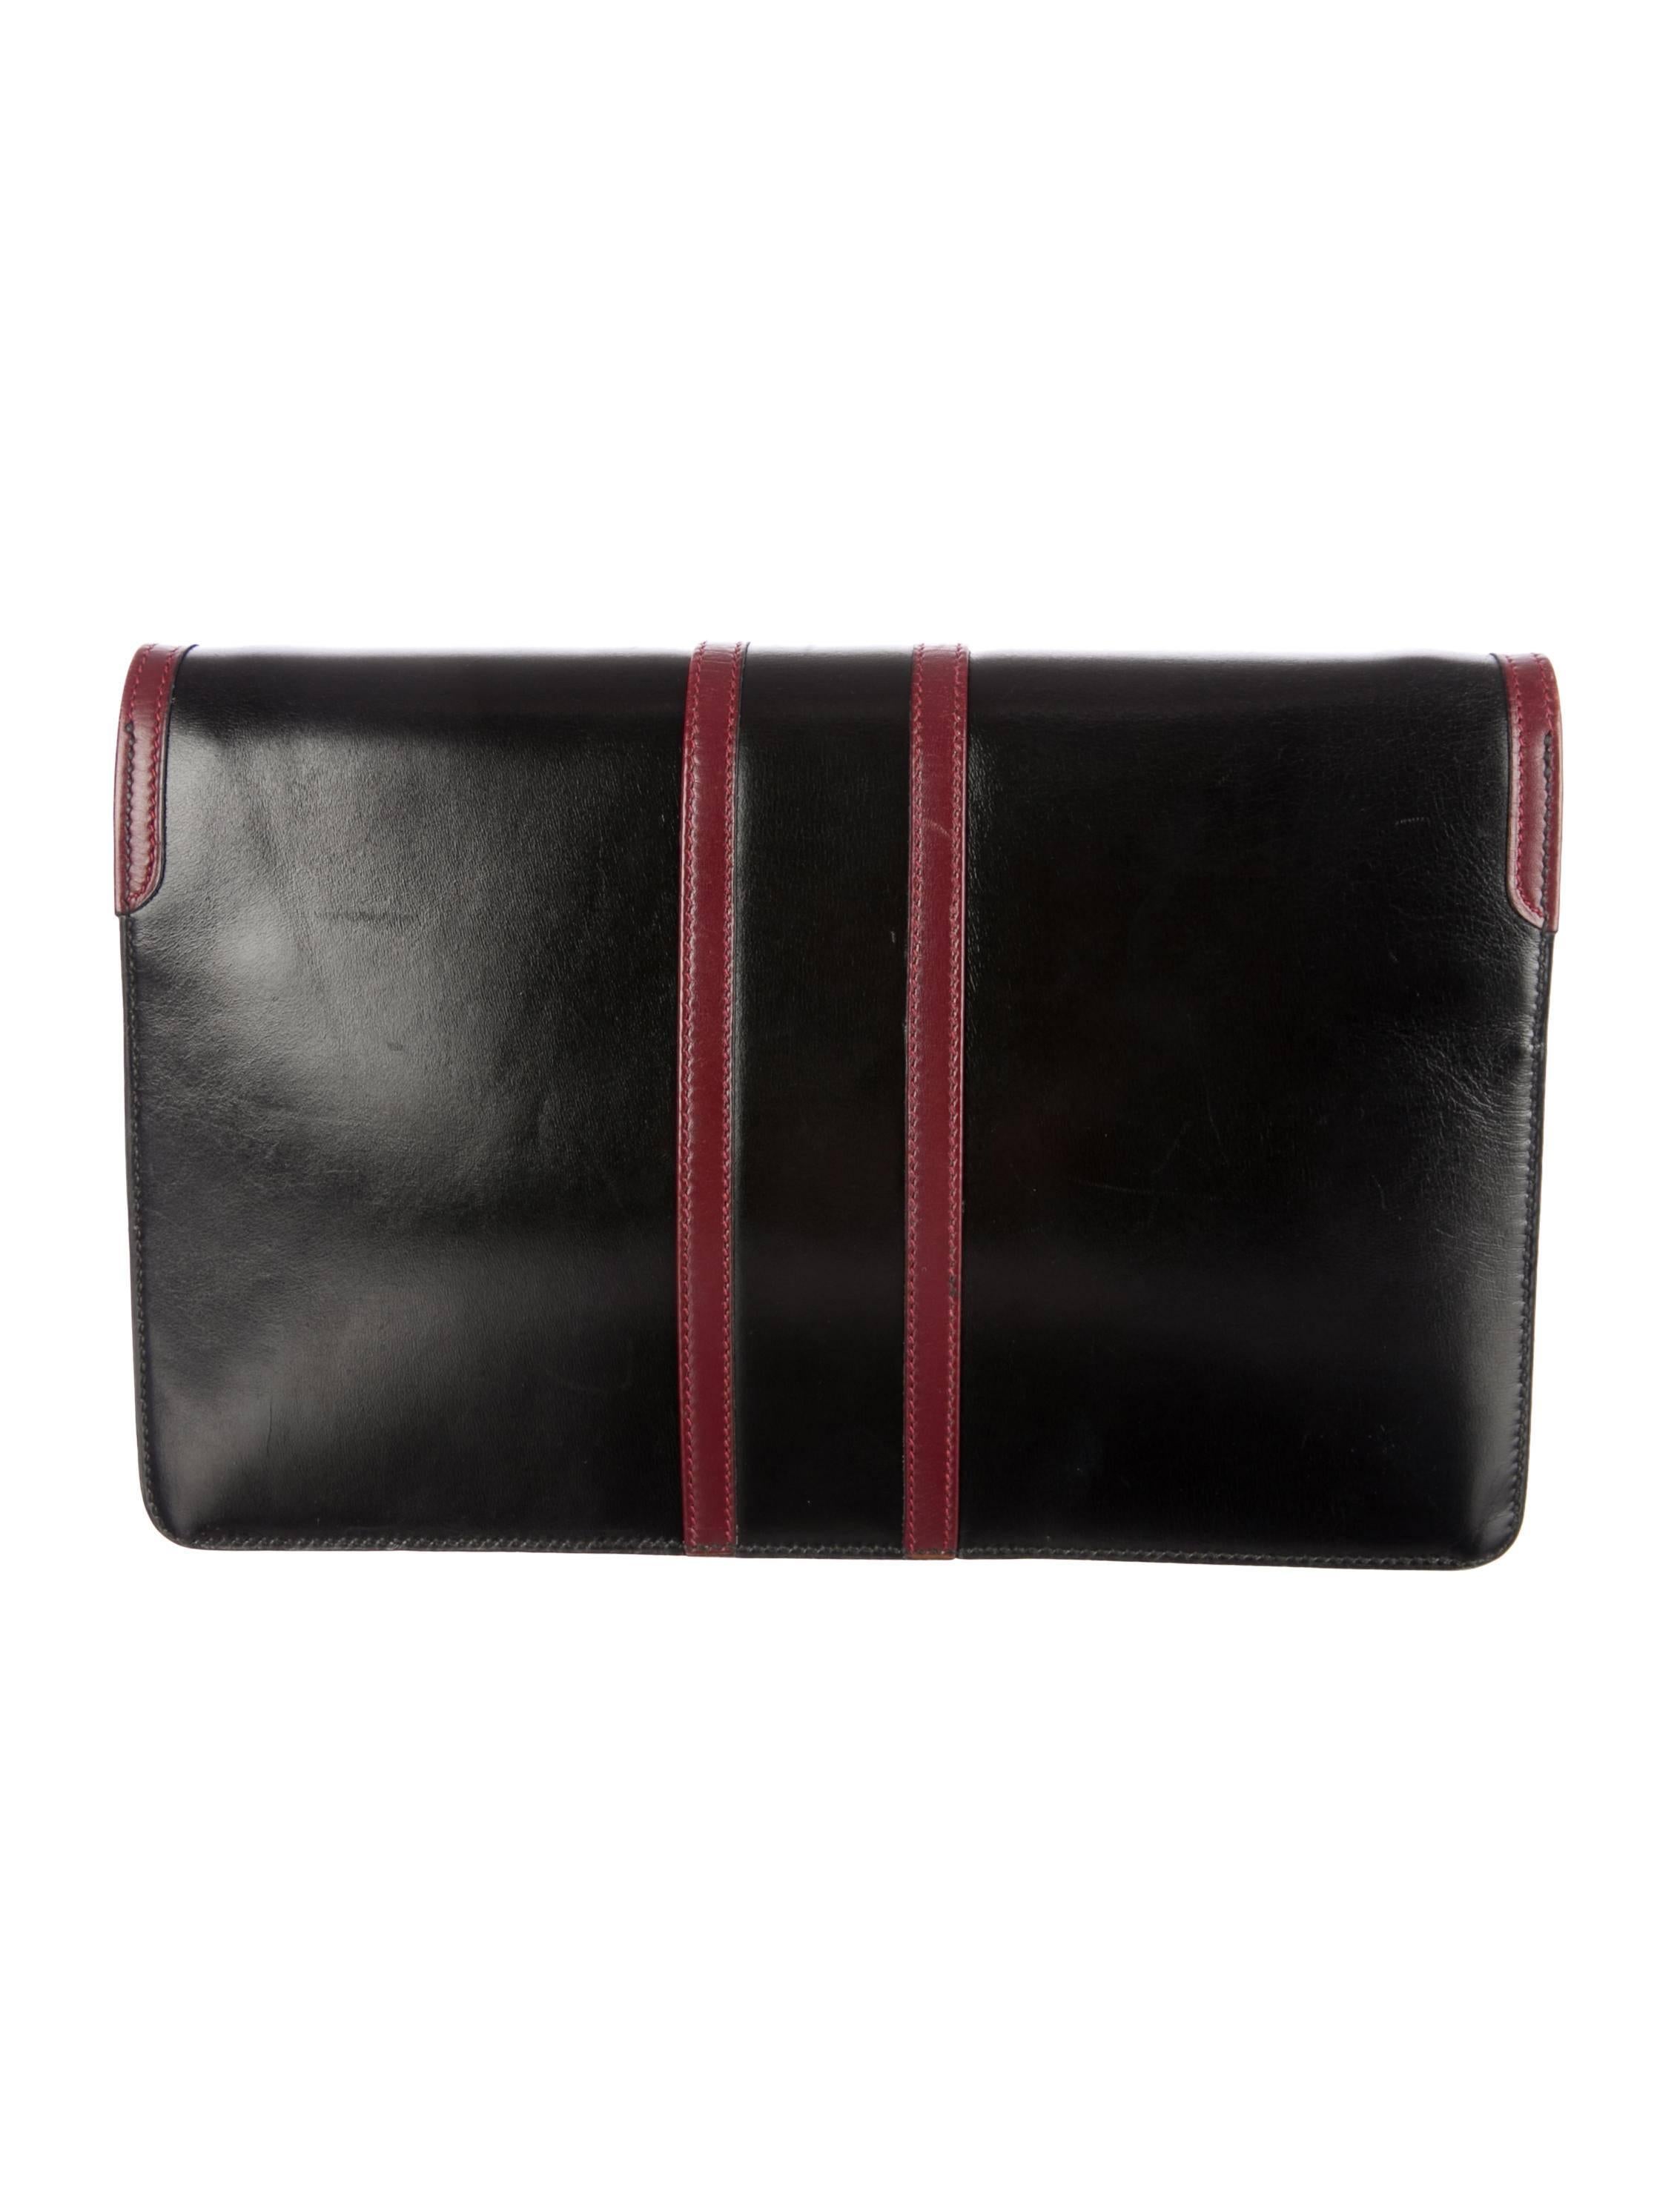 Women's Hermes Black and Red Box Leather Rouge H Flap Envelope Clutch Bag